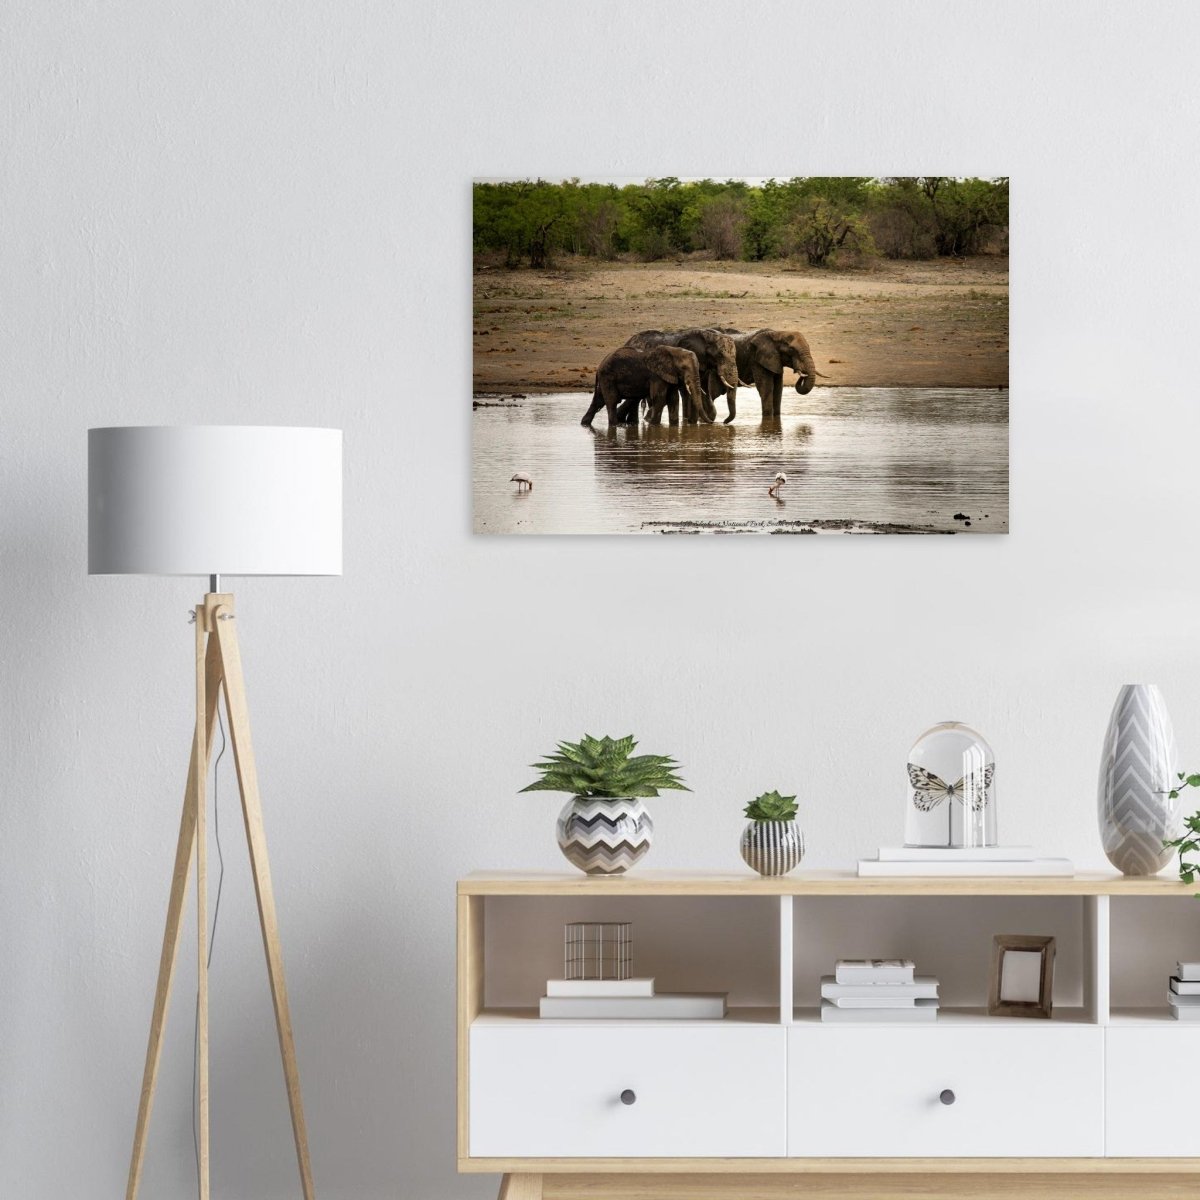 50x75 cm / 20x30″ Three Elephants in water by Picture This